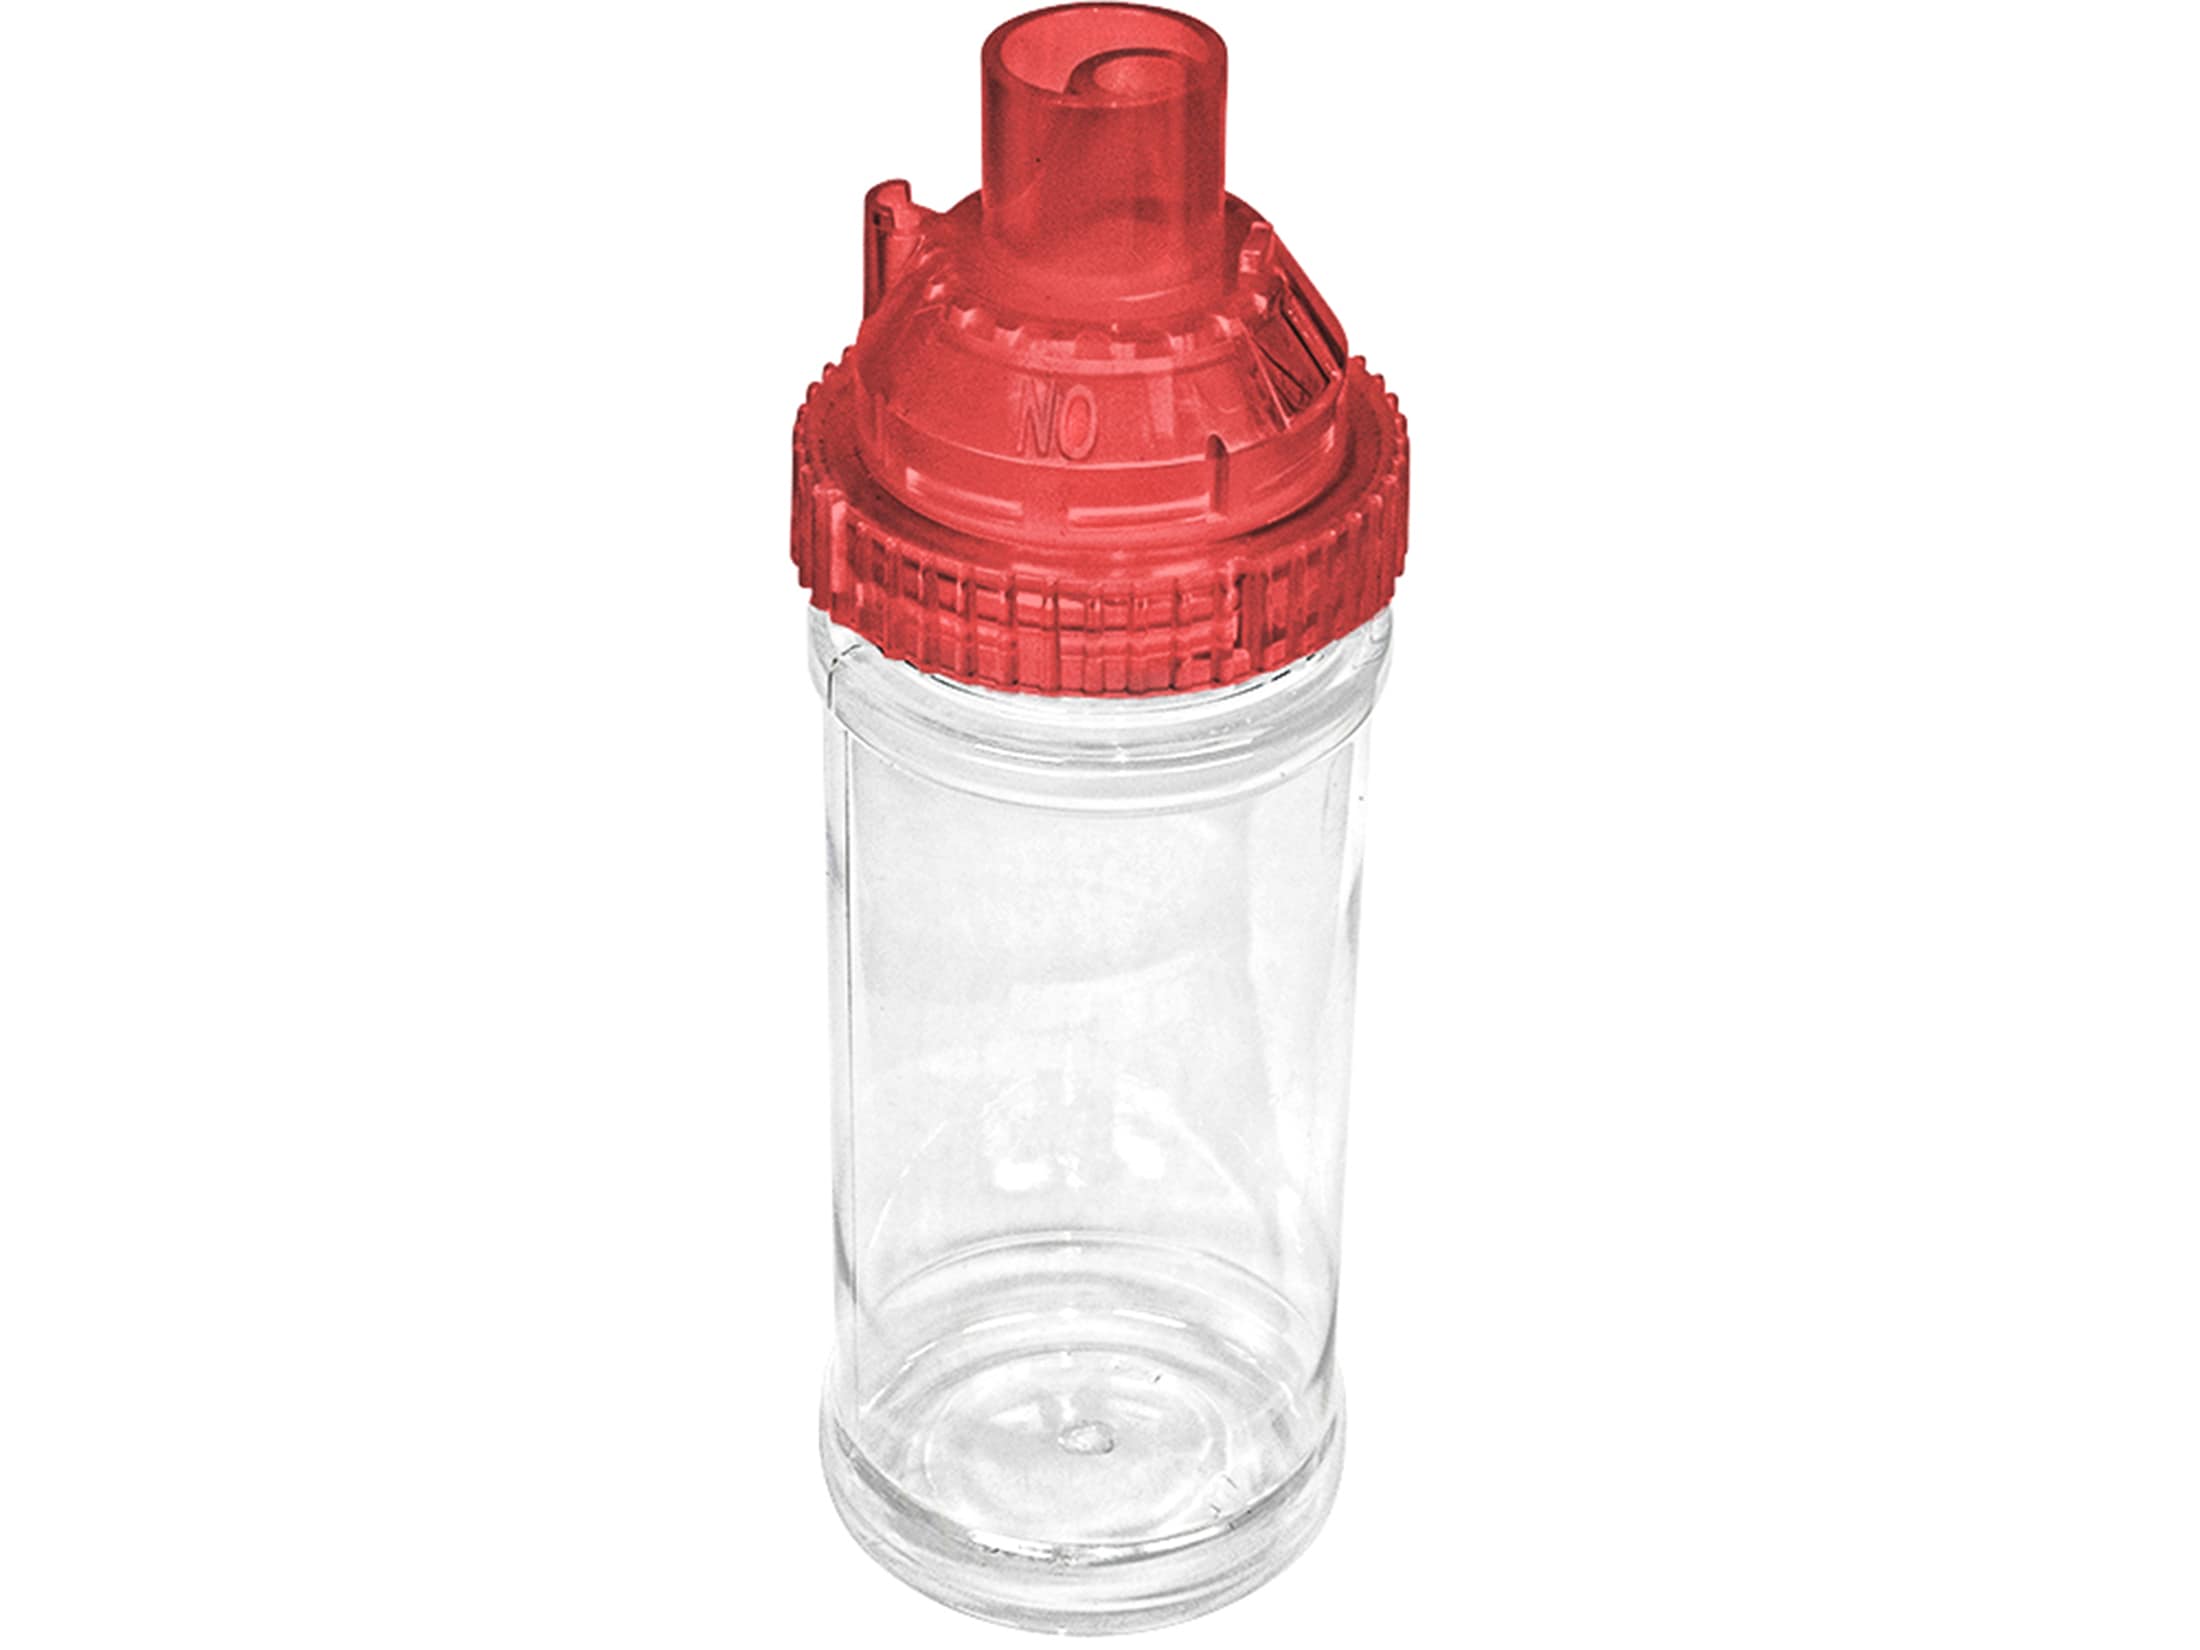 Shoulda Come With a Warning Insulated Sippy Cup Spill Proof Laser